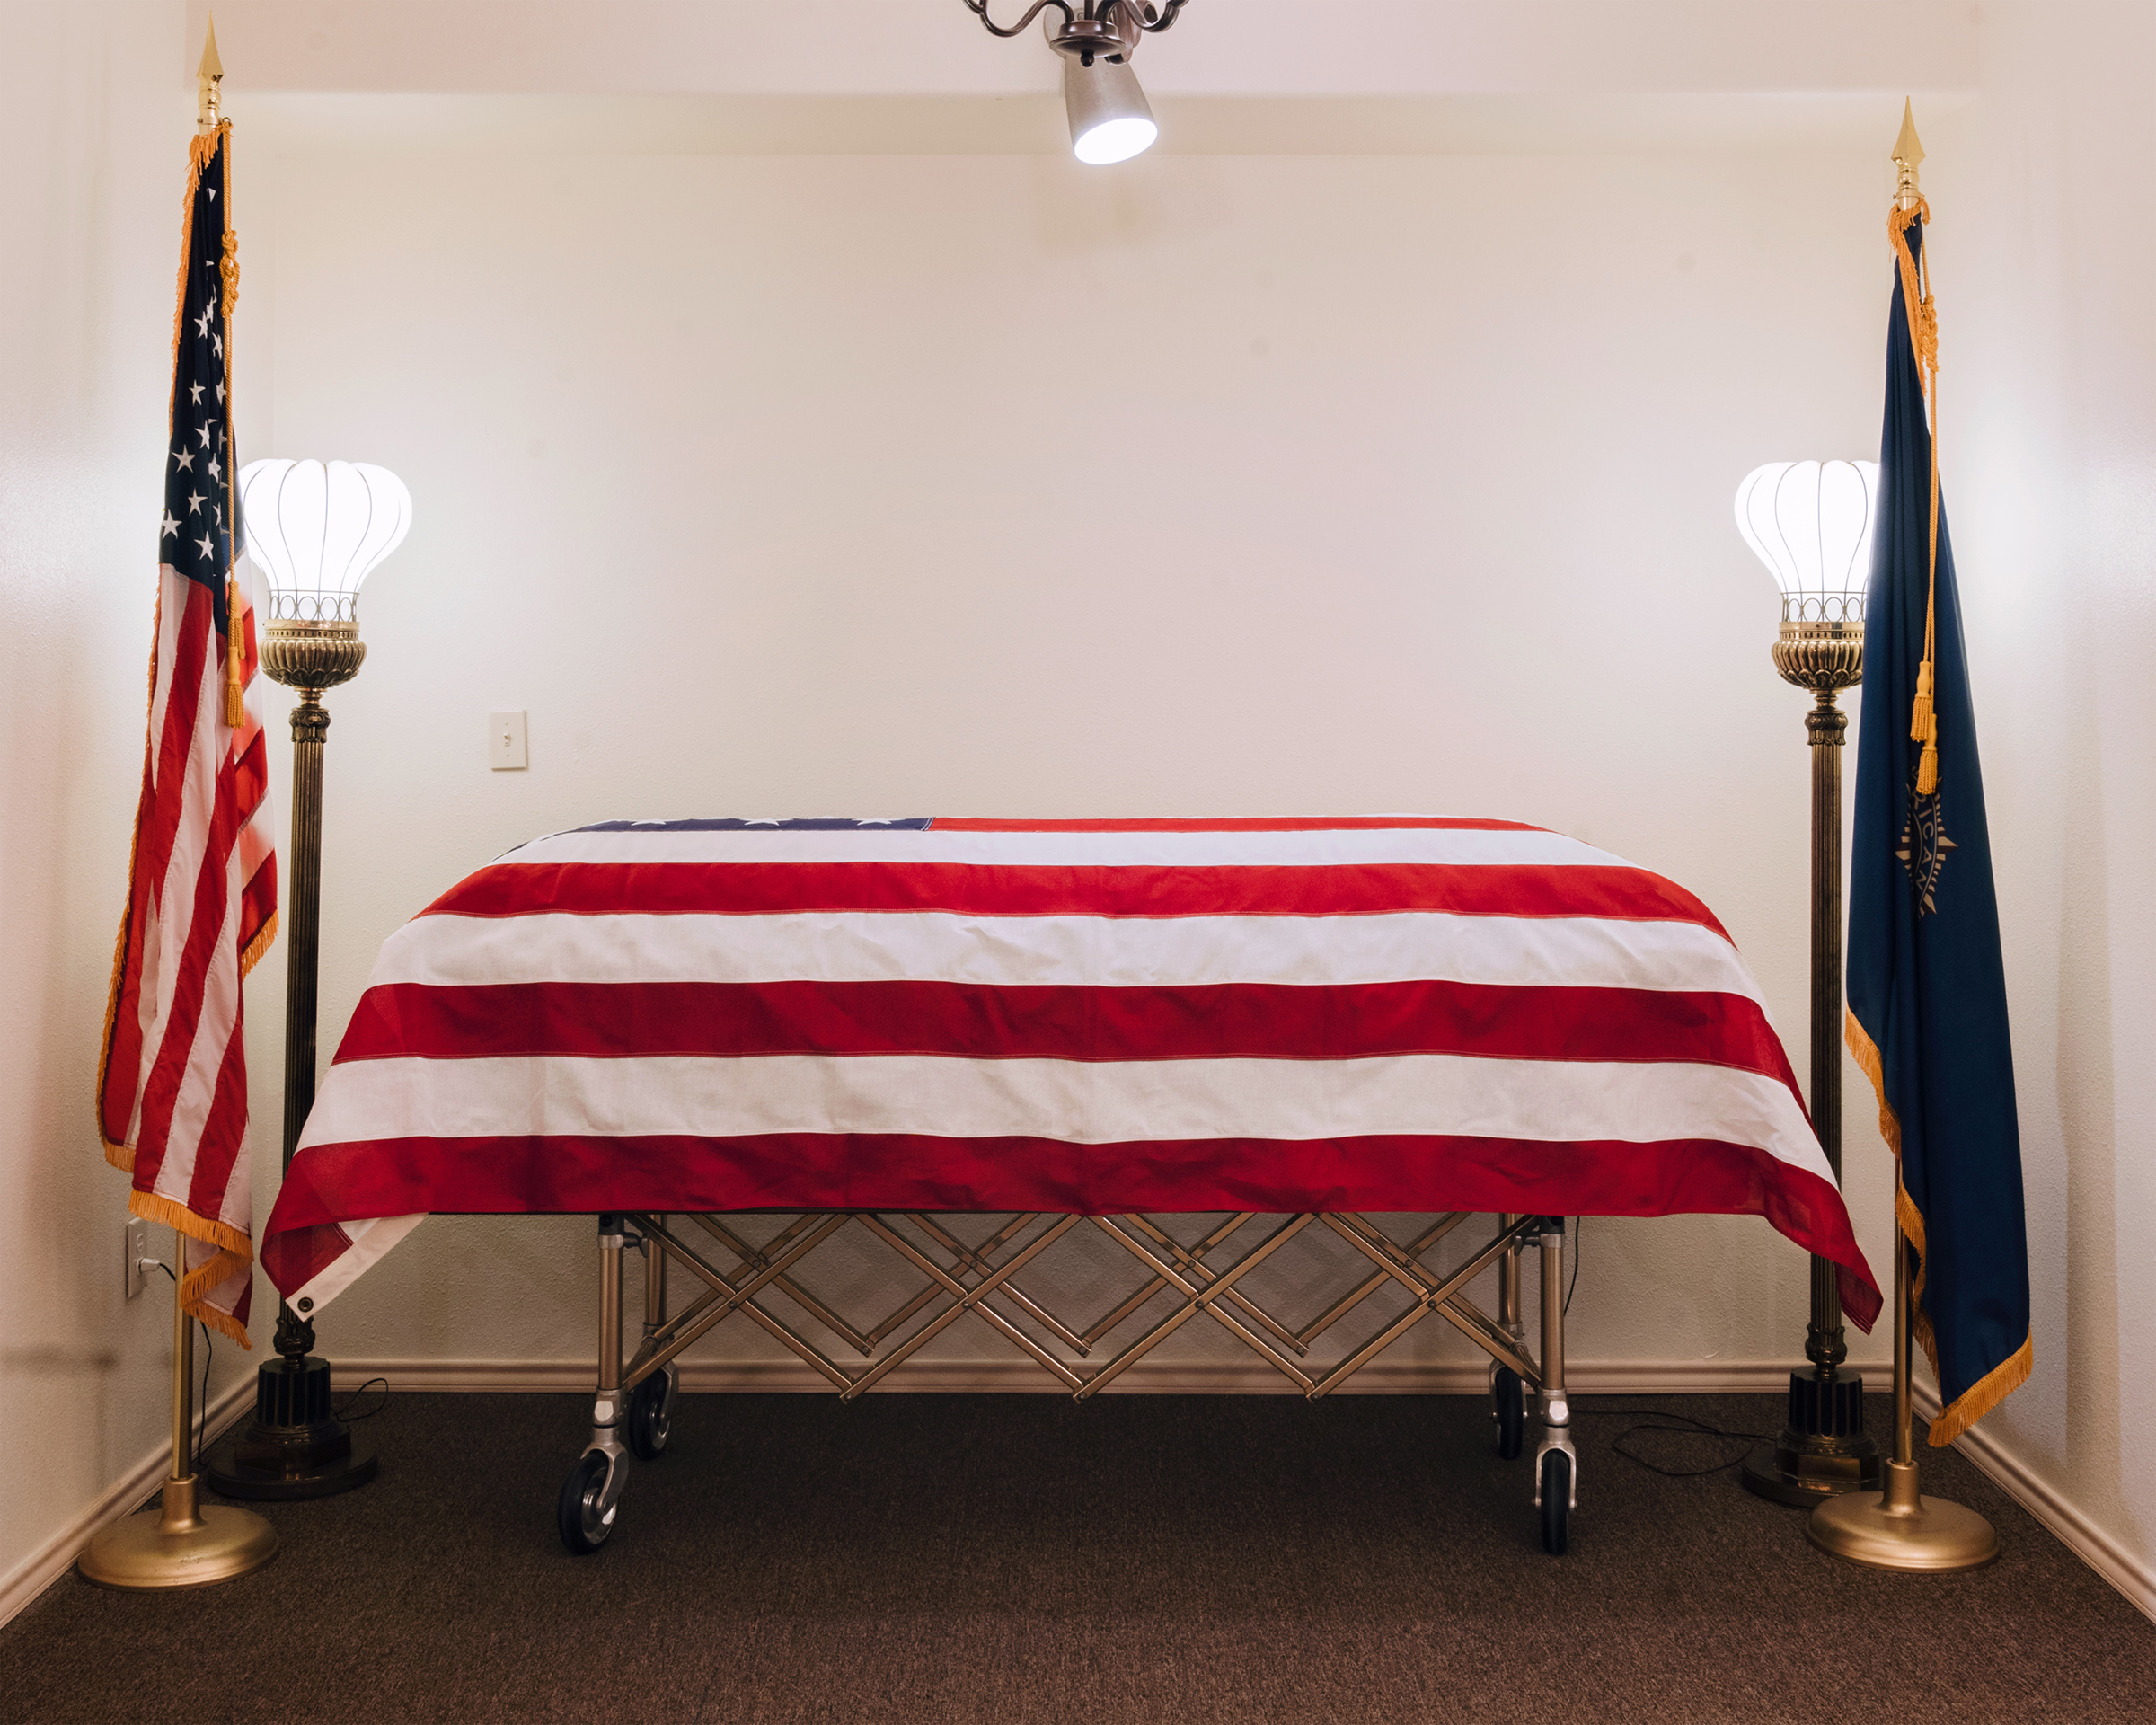 Victor 'Pat' Tumlinson's casket and remains, recently arrived at Duddlesten Funeral Home in Raymondville, TX on Dec. 6, 2019. (Bryan Schutmaat for TIME)